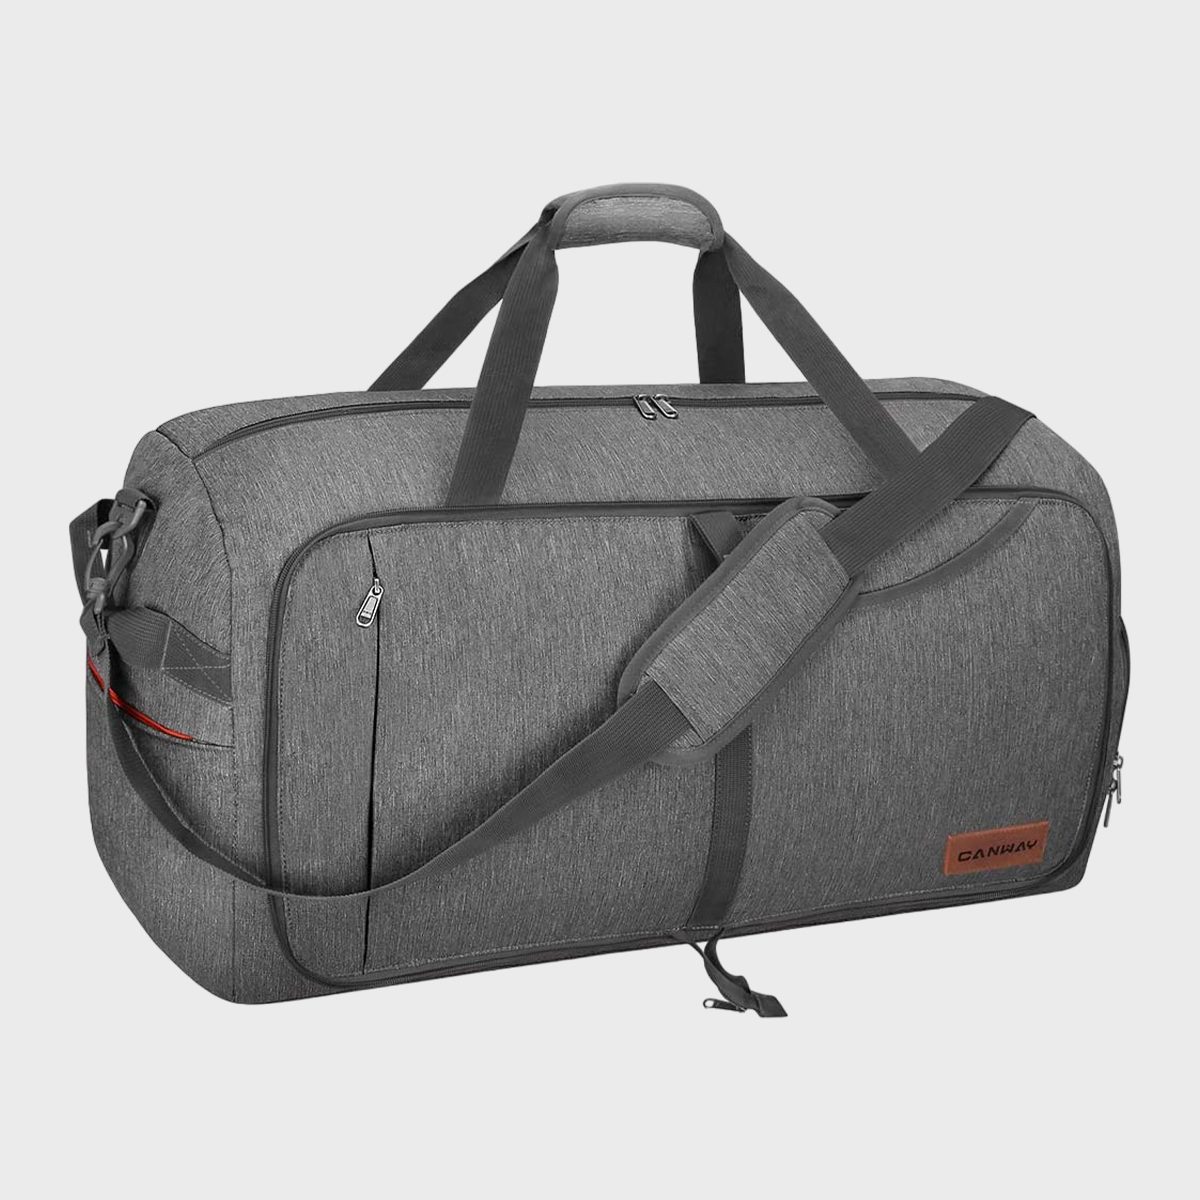 <h3>Canway 65L Travel Duffel Bag</h3> <p>This durable, do-it-all <a href="https://www.amazon.com/Foldable-Weekender-Compartment-Water-proof-Resistant/dp/B07GVK5VQ1" rel="noopener">duffle bag from Canway</a> is chock-full of functional features at a superb cost. In addition to its foldable and extendable design, the duffel also boasts several pockets (including ones solely designed for shoes) to stay organized. Its water- and tear-resistant material will last for years to come. Customers can choose from 10-plus color options—each for less than $40—so you can <a href="https://www.rd.com/list/shouldnt-wear-on-airplane/">travel in style</a>.</p> <p>"This duffel bag has been on four or five trips with me since I bought it. EVERYTHING fits inside," writes <a href="https://www.amazon.com/gp/customer-reviews/R3AG4WQP8ZE9R/" rel="noopener">Gillian</a>, one of the 13,000+ five-star reviewers. "There are so many pockets that I've considered a necklace or two 'gone for good' until the bag made a reappearance for another trip. For air travel and quick weekend trips, the duffel bag holds up and things inside stay safe."</p> <p><strong>Pros</strong></p> <ul> <li>Affordable</li> <li>Extendable and foldable design</li> <li>Padded straps provide added comfort</li> <li>Multiple pockets for optimal organization</li> <li>Durable water- and tear-resistant material</li> </ul> <p><strong>Cons</strong></p> <ul> <li>No wheels, so it can get heavy if you tend to overpack</li> </ul> <p class="listicle-page__cta-button-shop"><a class="shop-btn" href="https://www.amazon.com/Foldable-Weekender-Compartment-Water-proof-Resistant/dp/B07GVK5VQ1">Shop Now</a></p>